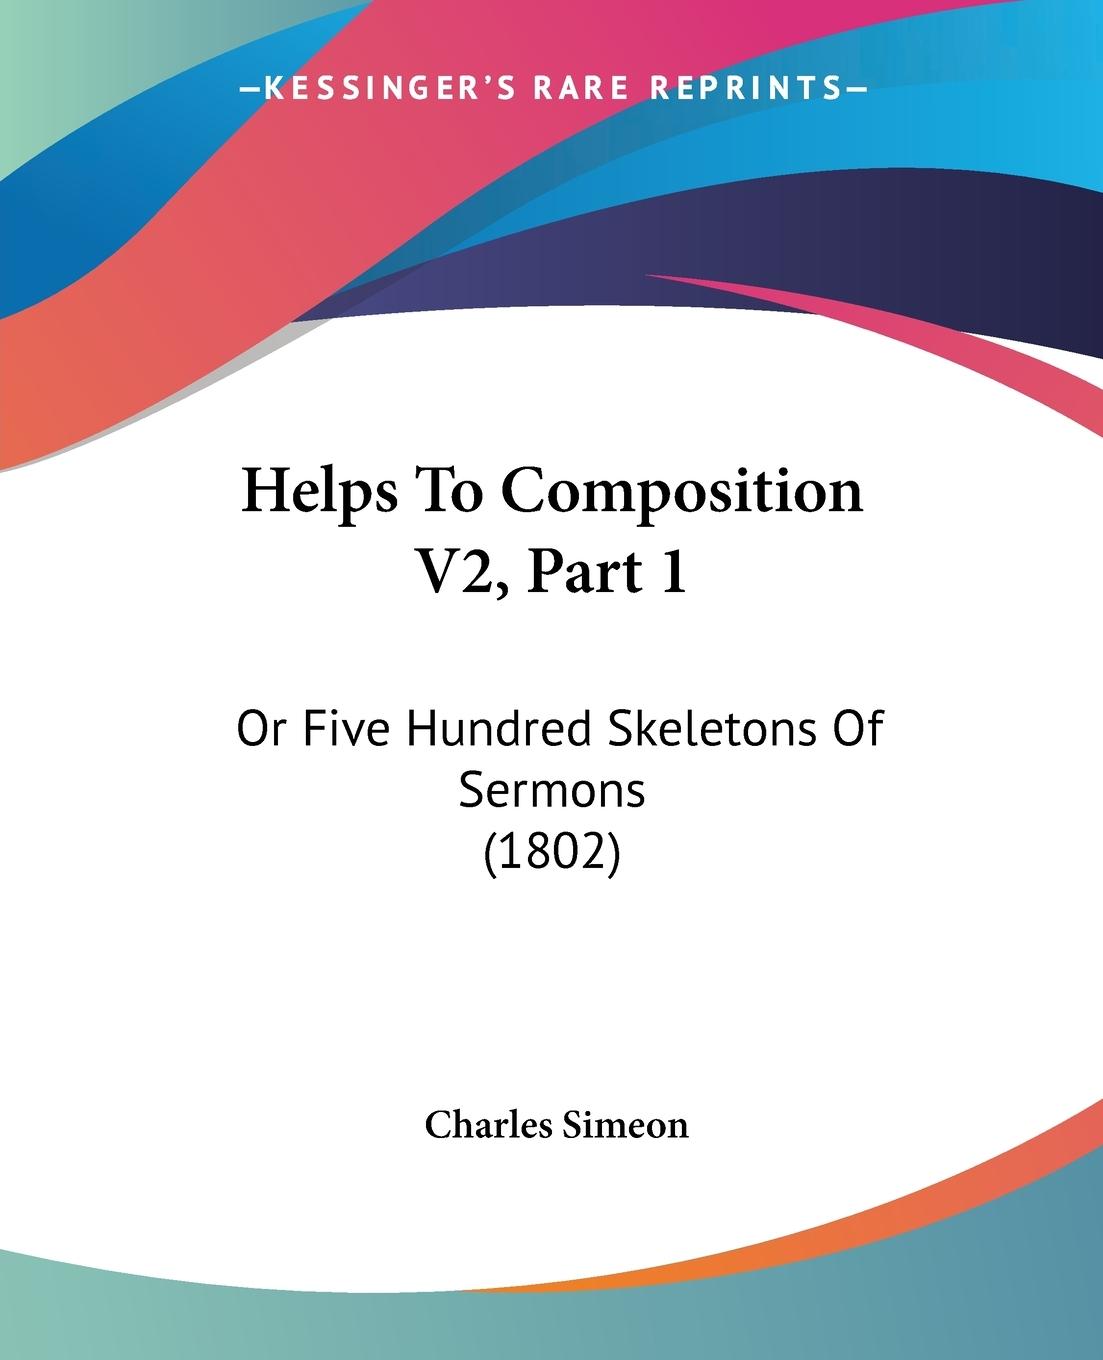 Helps To Composition V2, Part 1 - Simeon, Charles